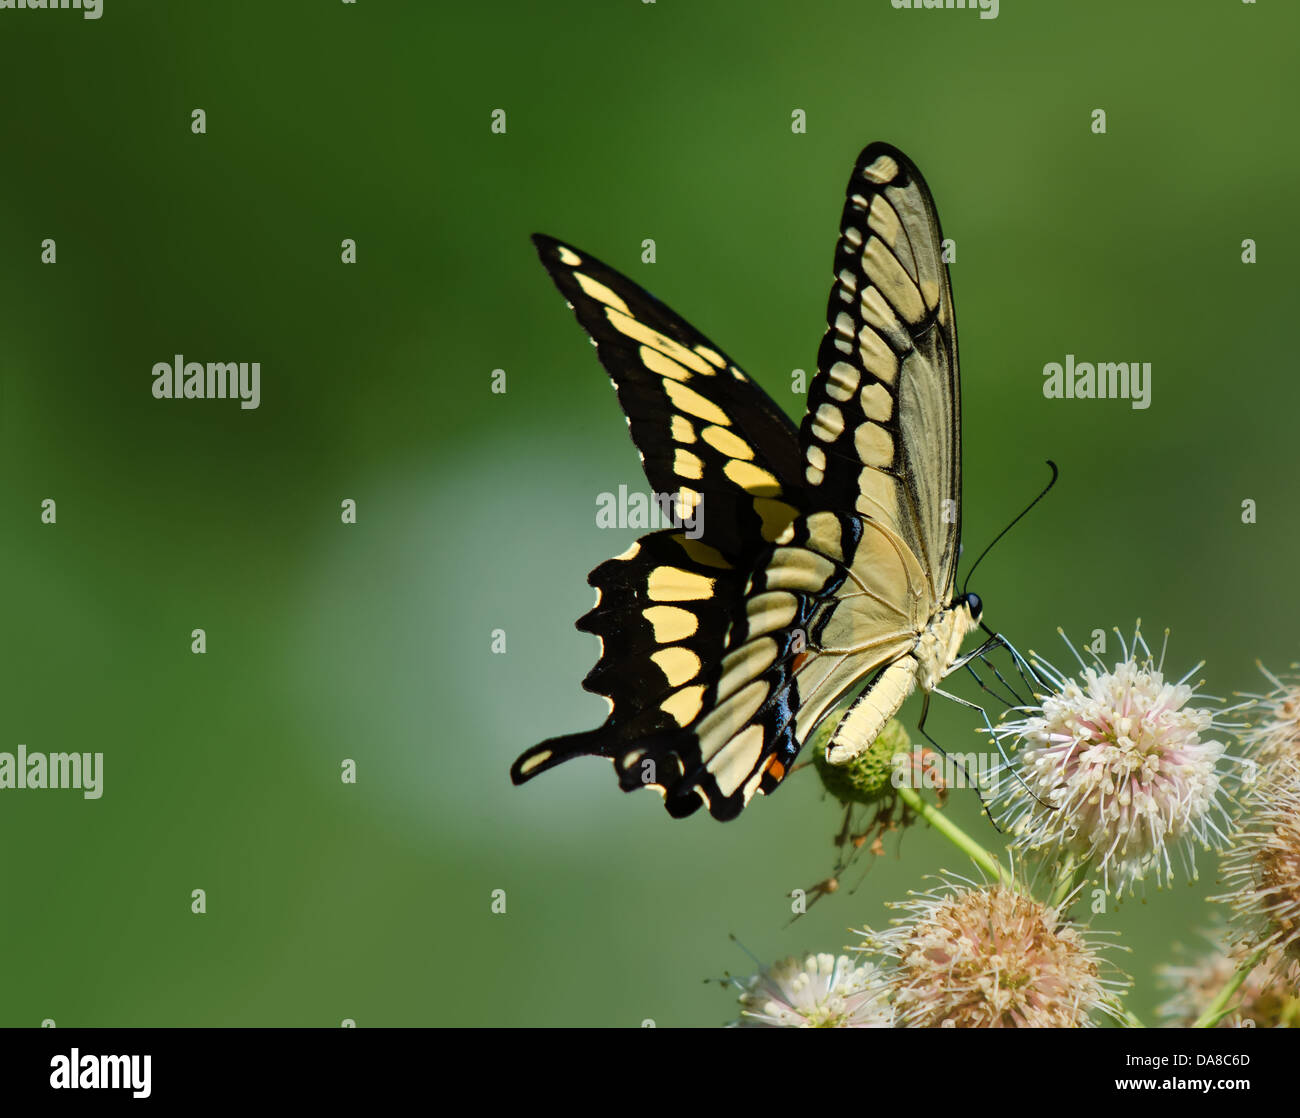 Giant Swallowtail butterfly (Papilio cresphontes) feeding on button bush flowers. Green soft background with copy space. Stock Photo